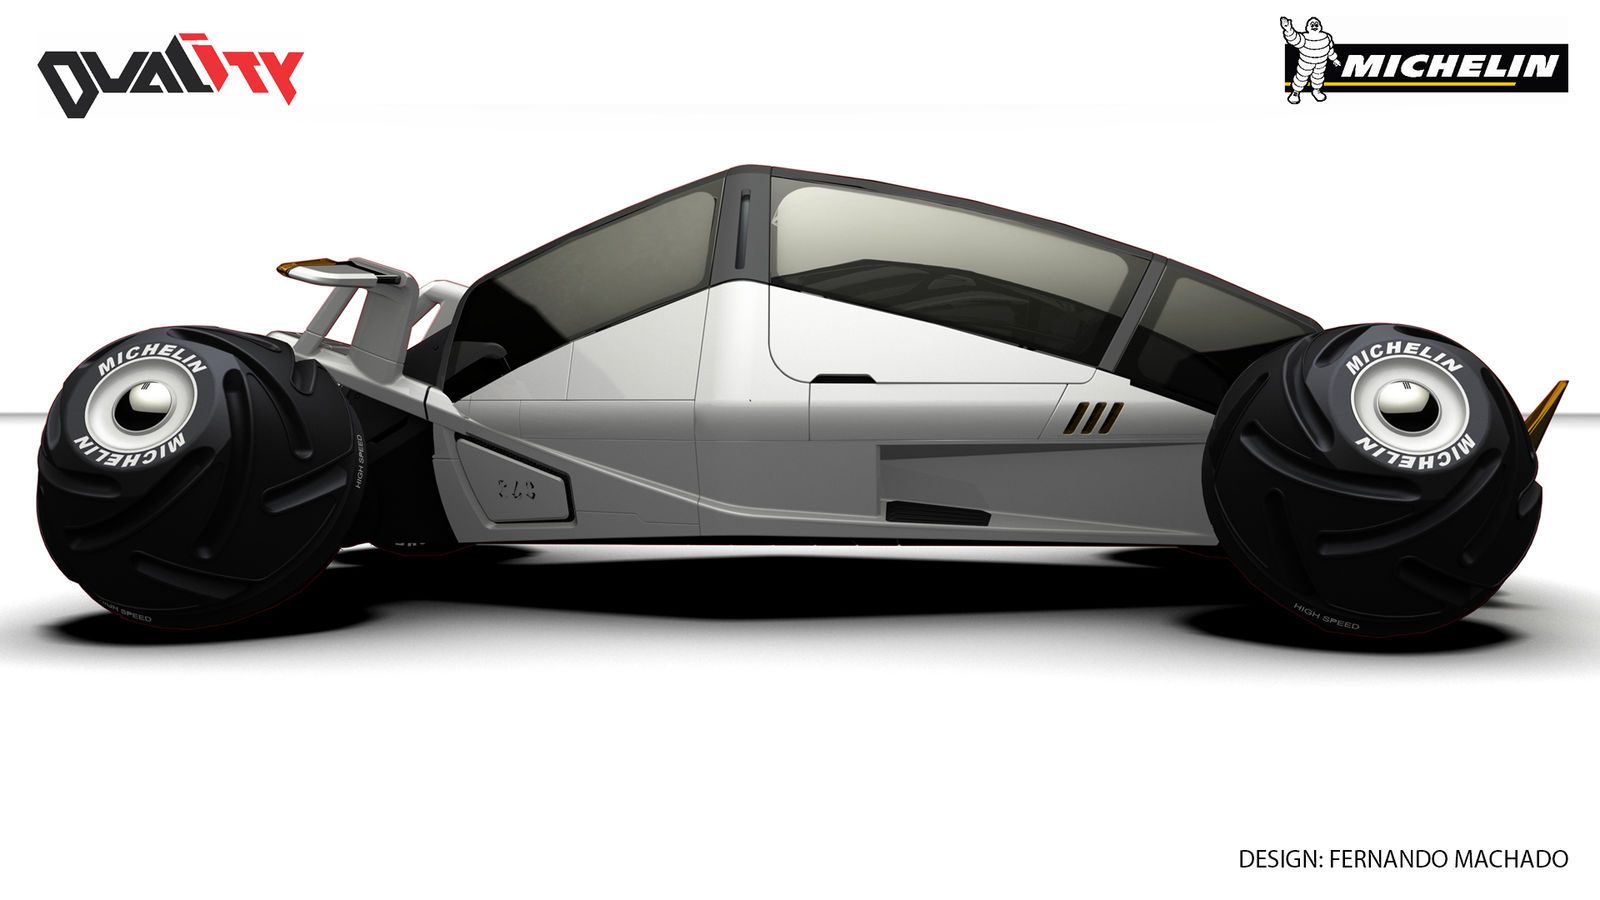 Amazing futuristic car designs from racing cars to rescue vehicles image 15